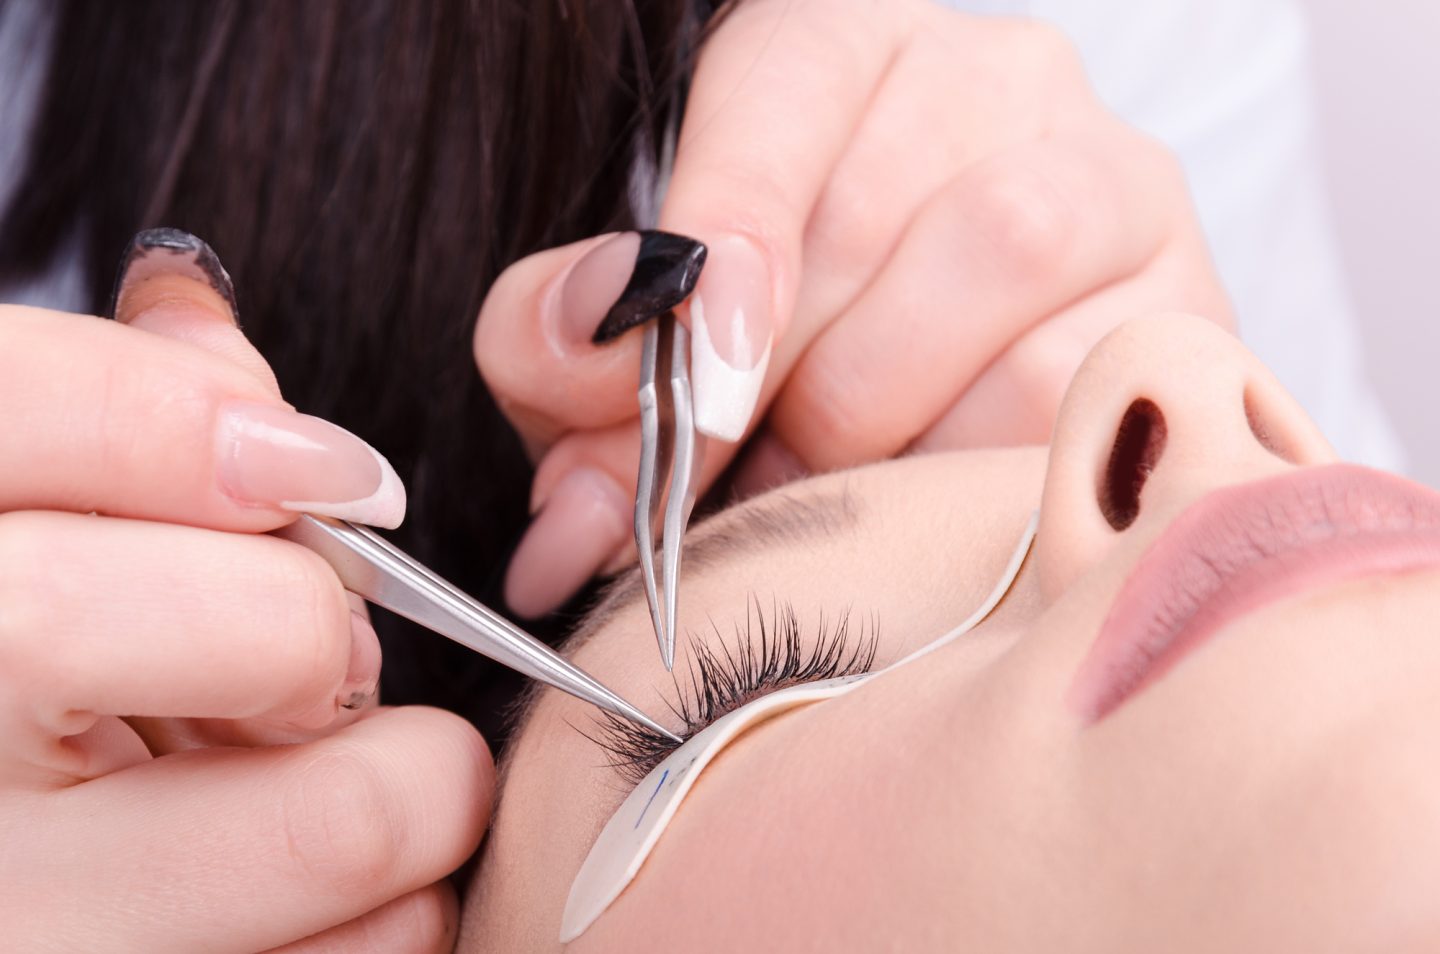 Can I Wash My Eyelash Extensions After 24 Hours?